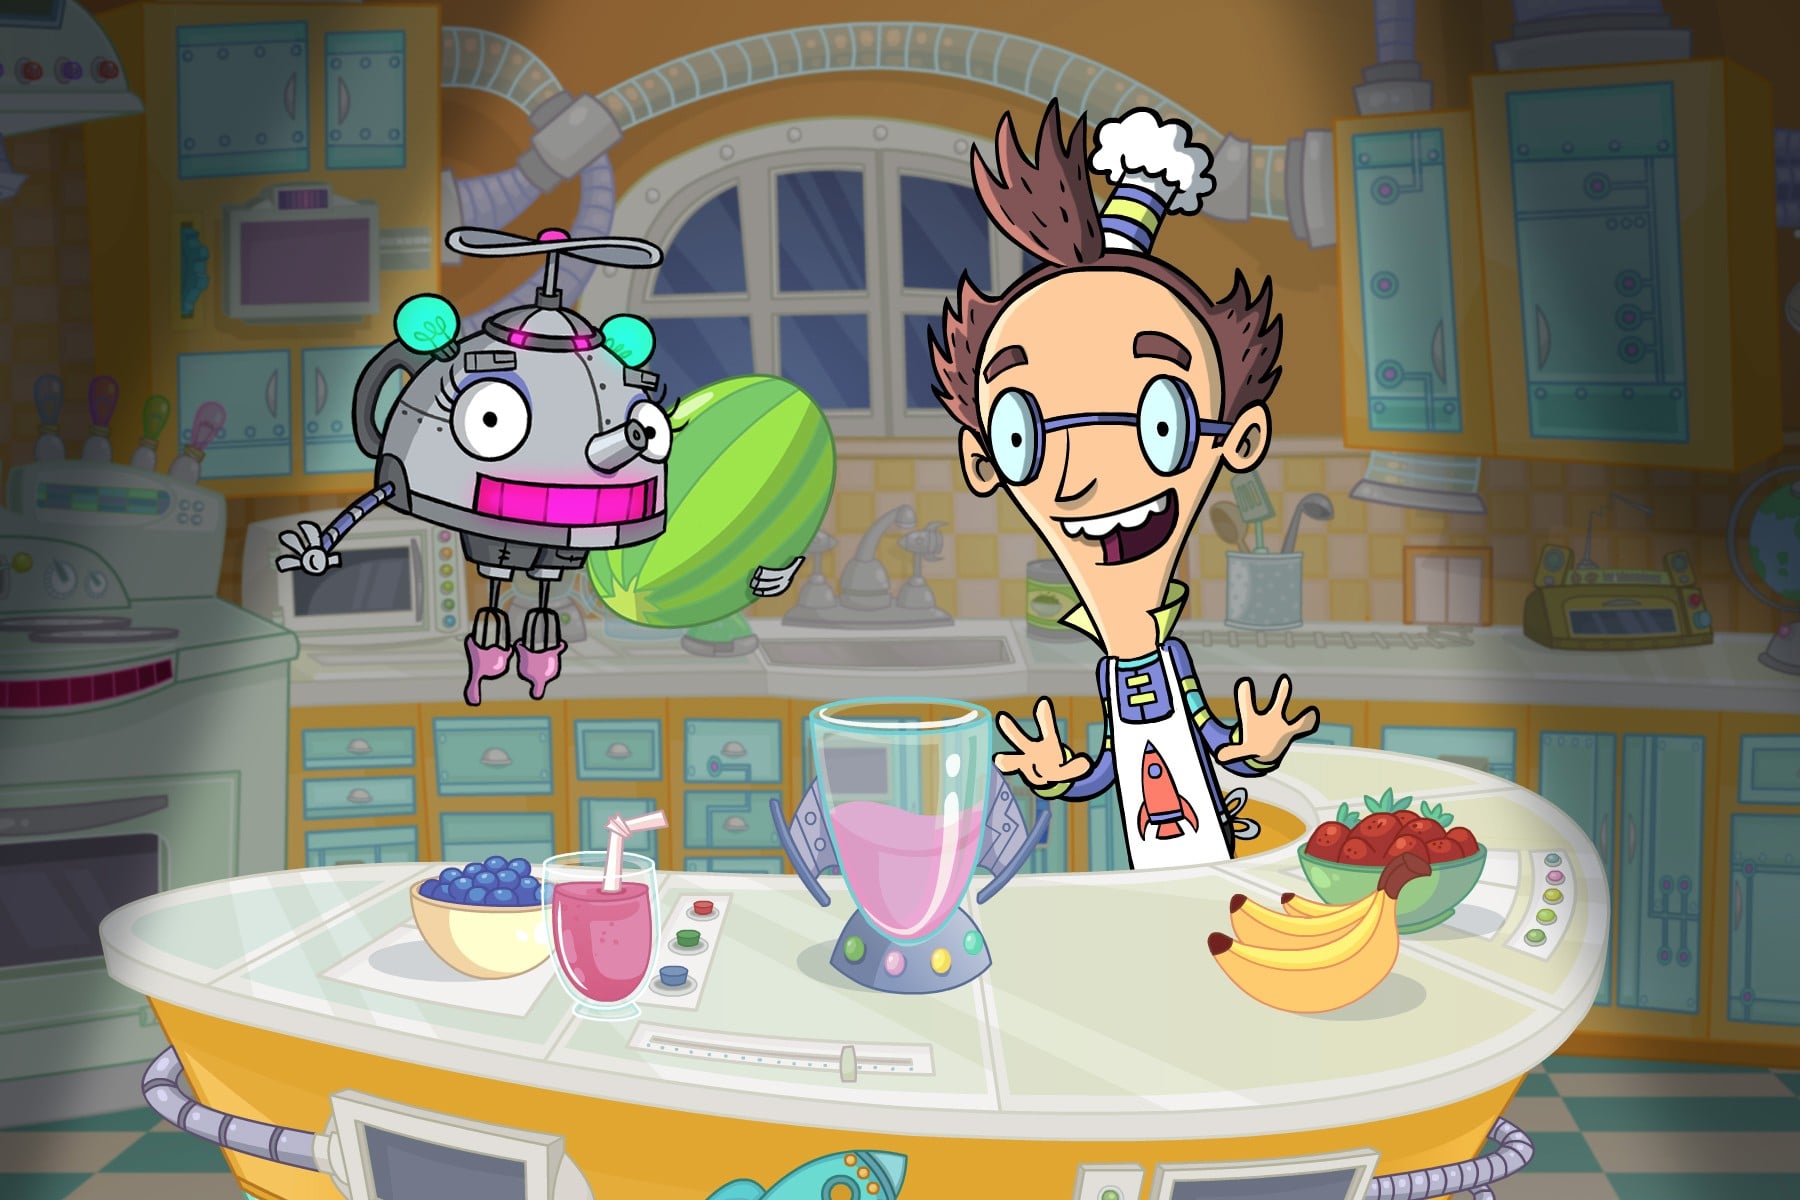 Cooking Papa: Restaurant Game – Apps on Google Play